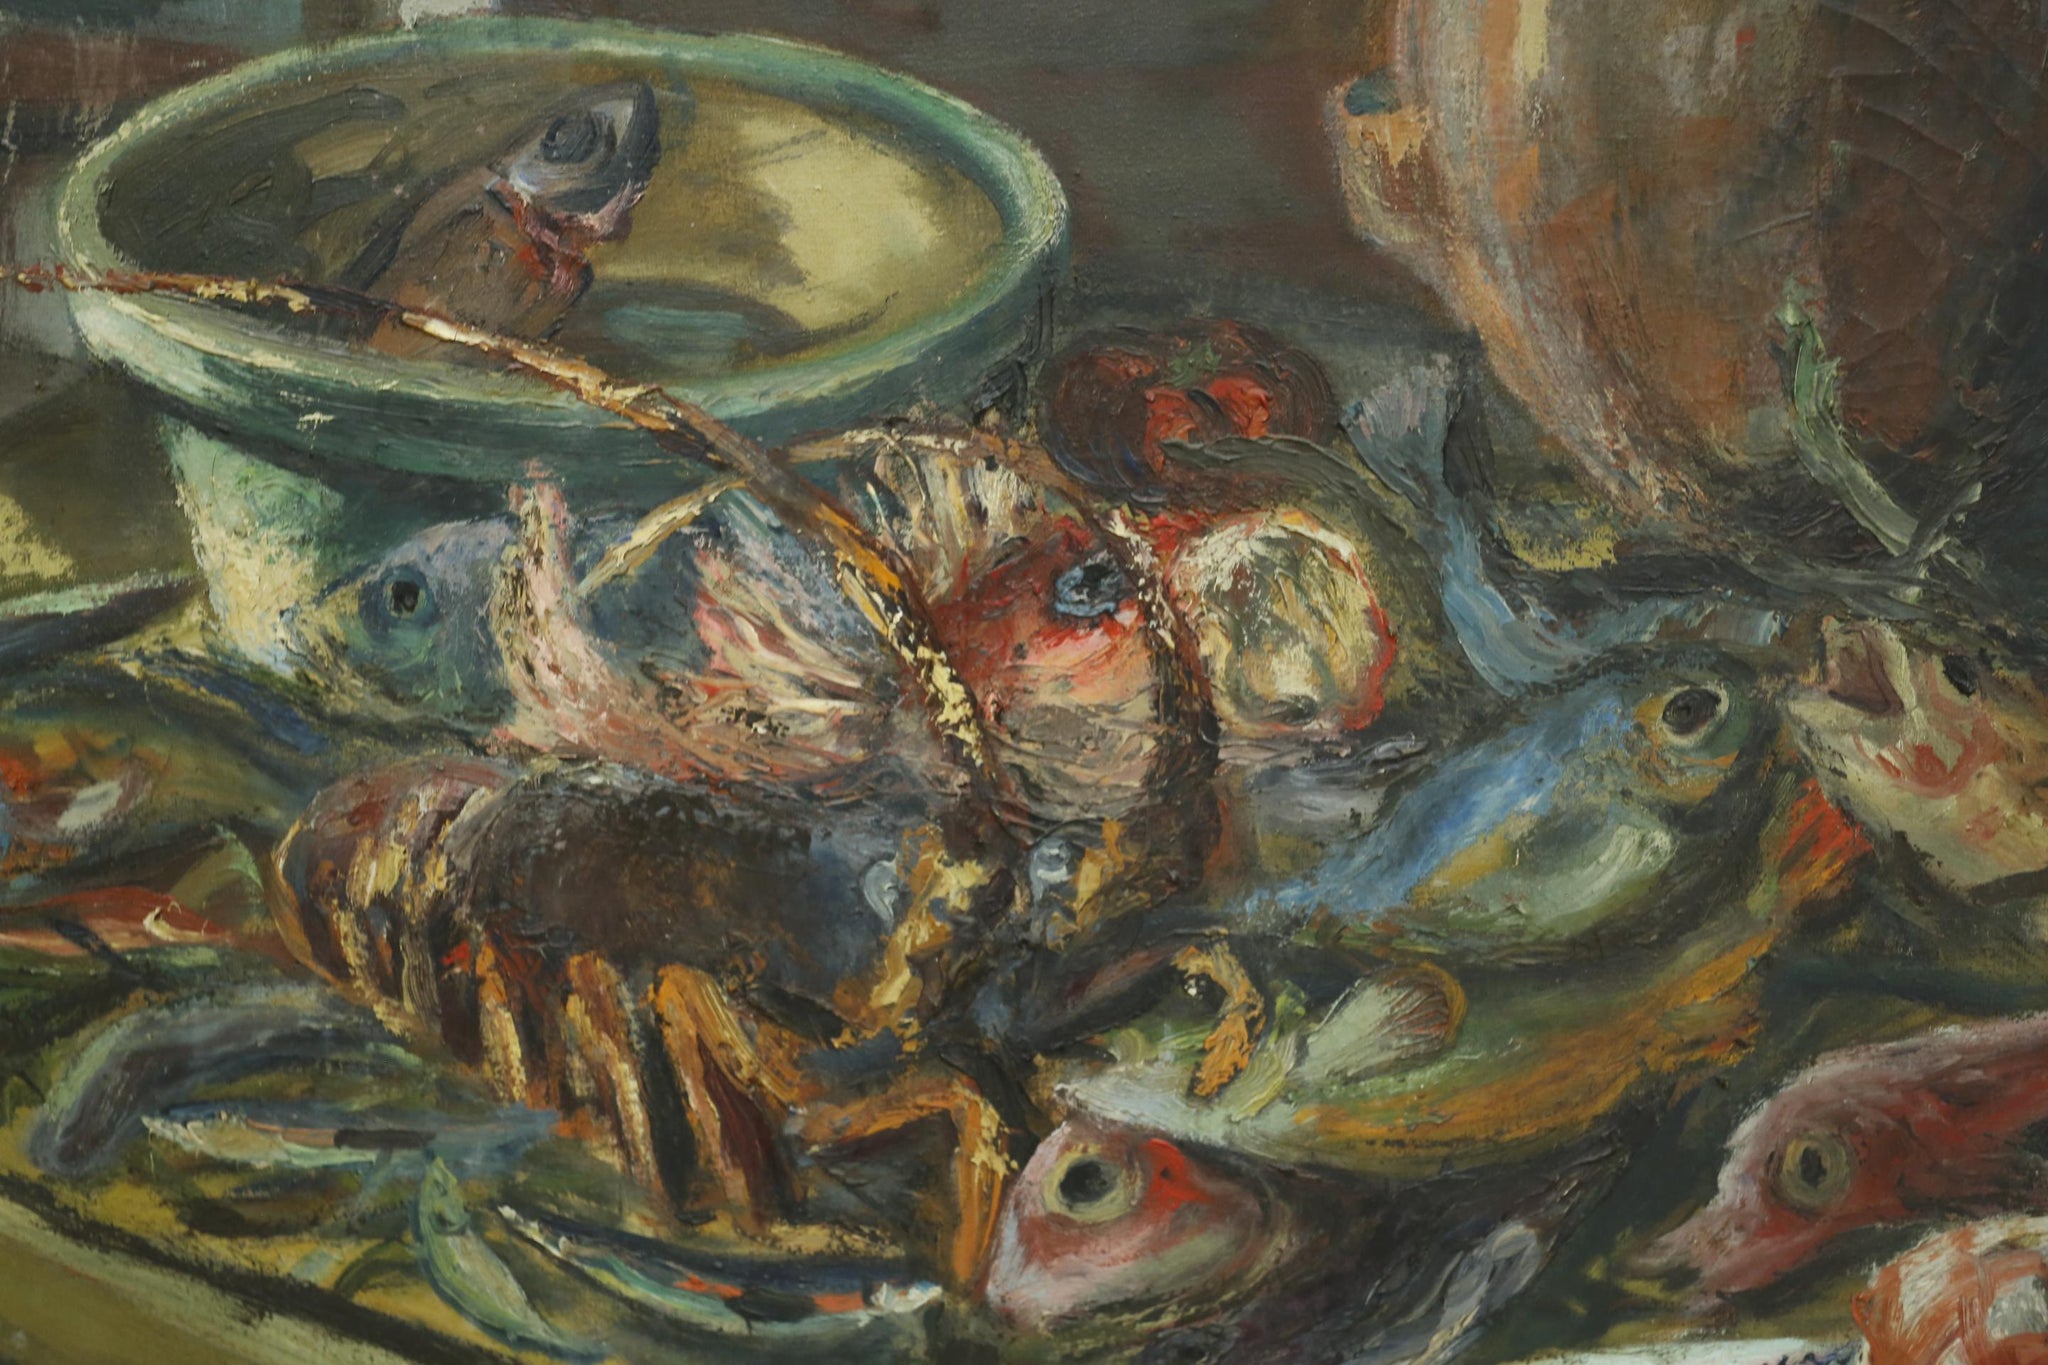 Large 20th century oil on canvas painting of seafood on a table